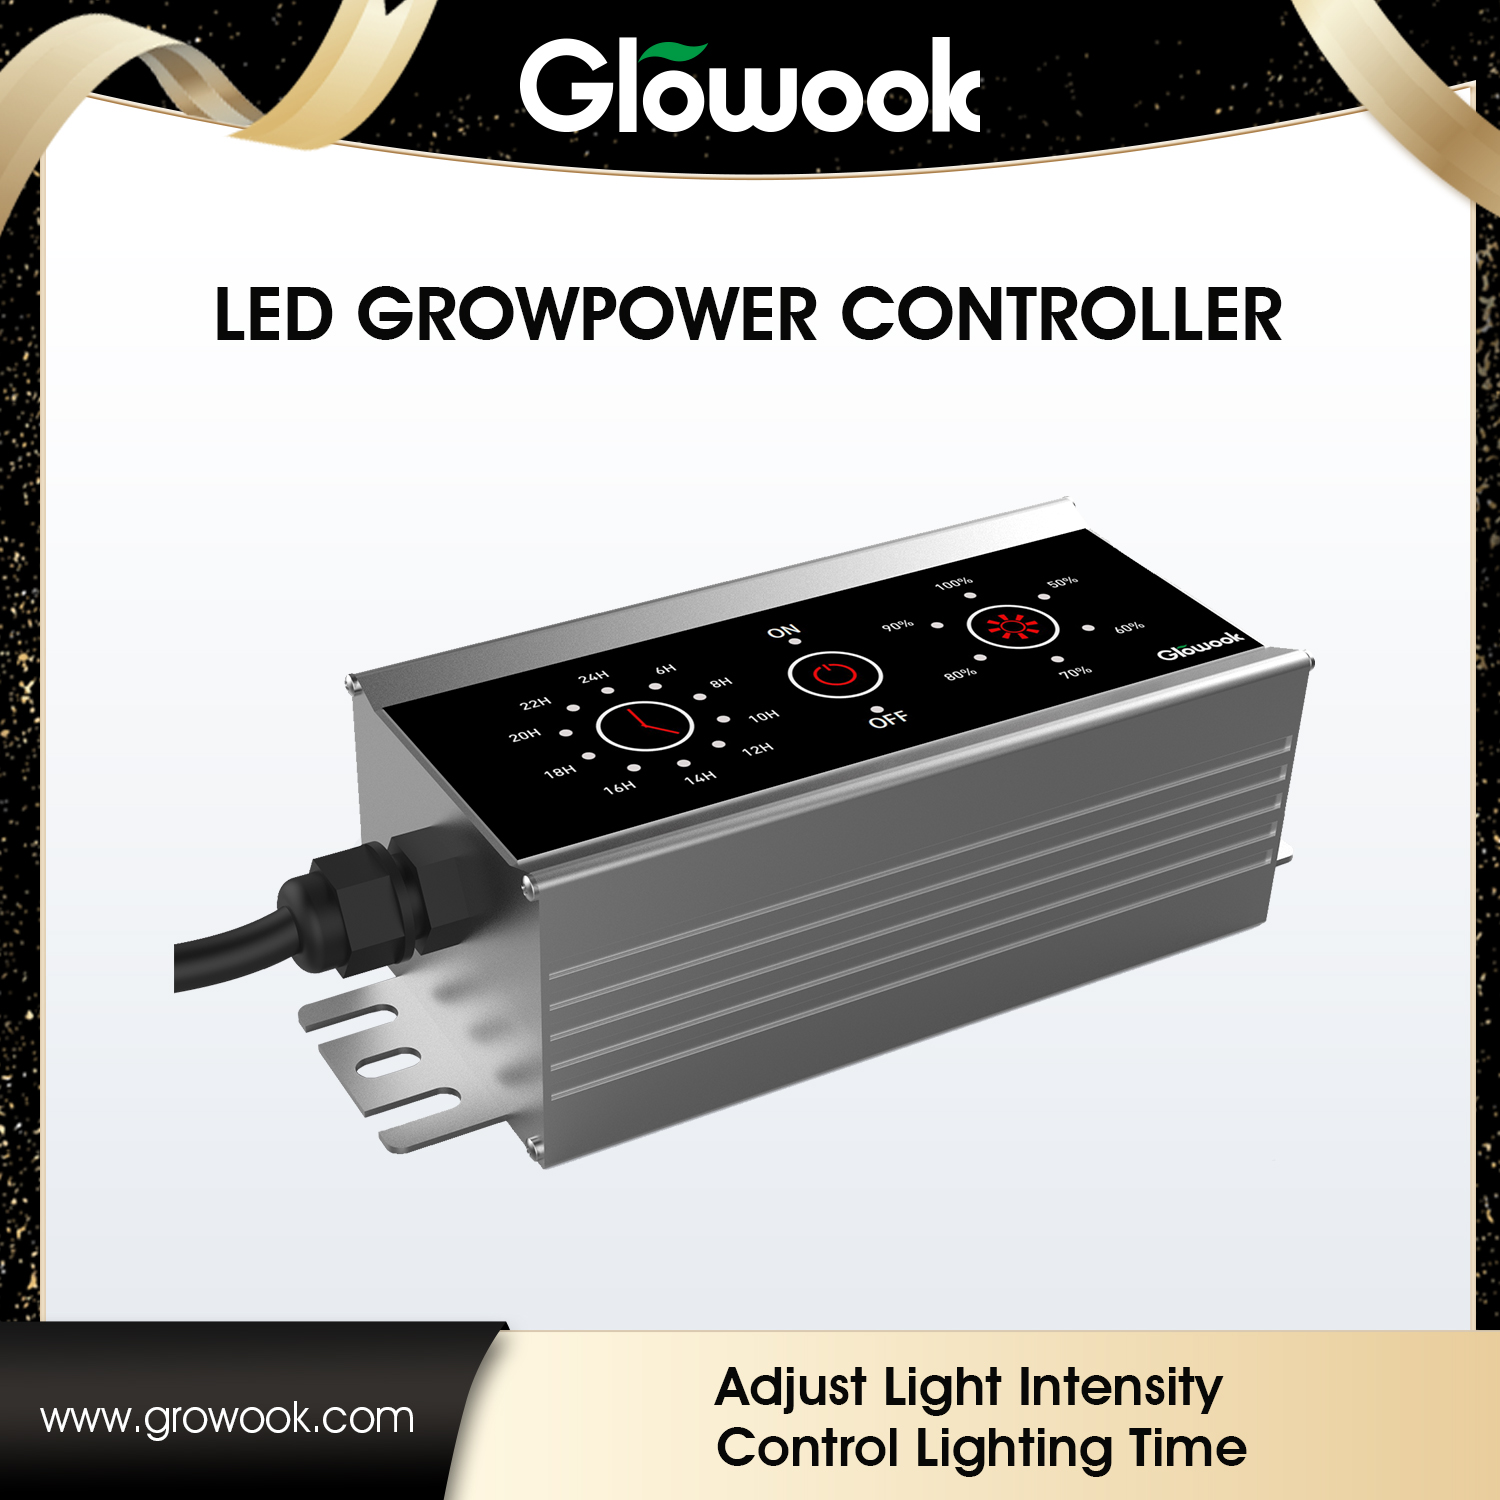 LED Growpower Controller Featured Image